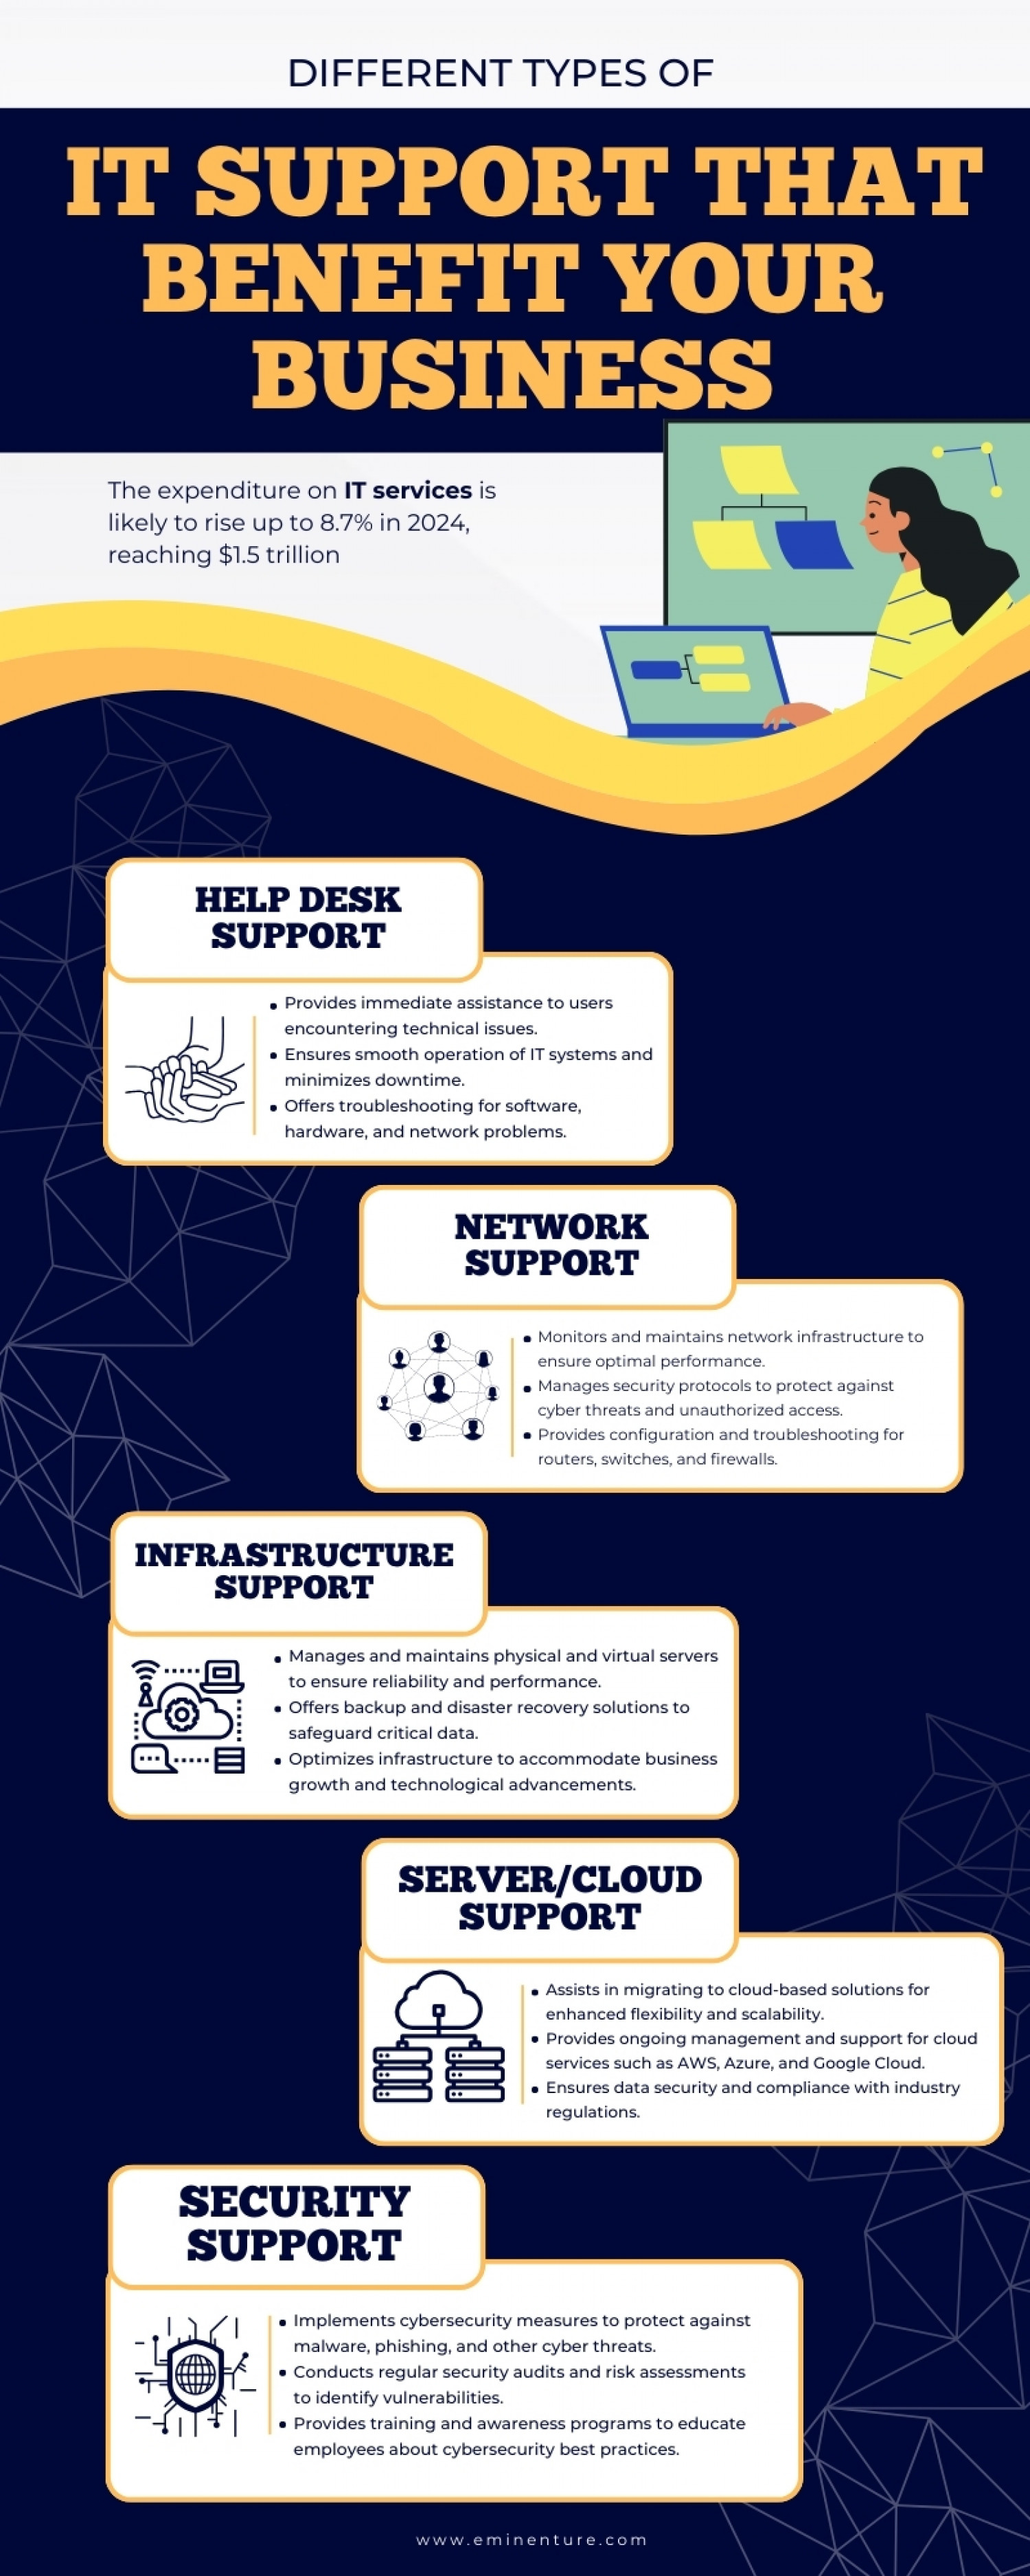 Different Types of IT Support That Benefit Your Business Infographic